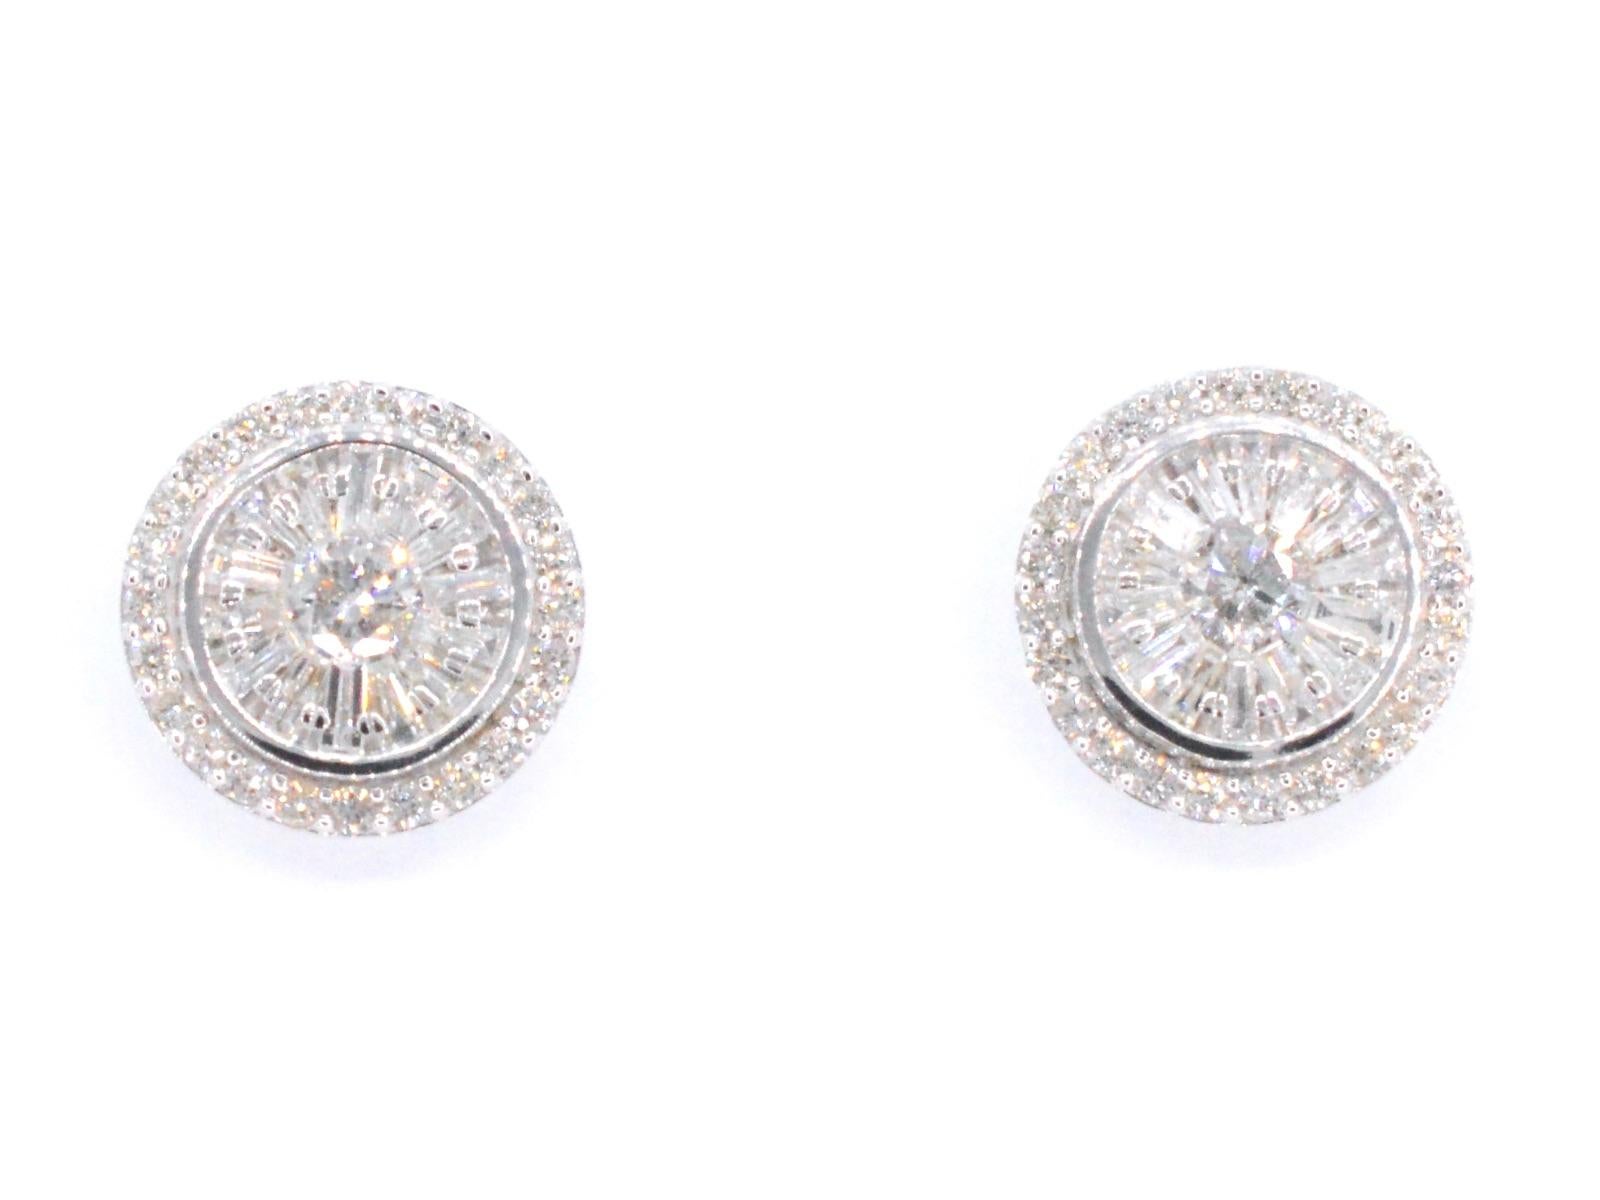 White Gold Entourage Earrings Set with 1.20 Carat For Sale 1